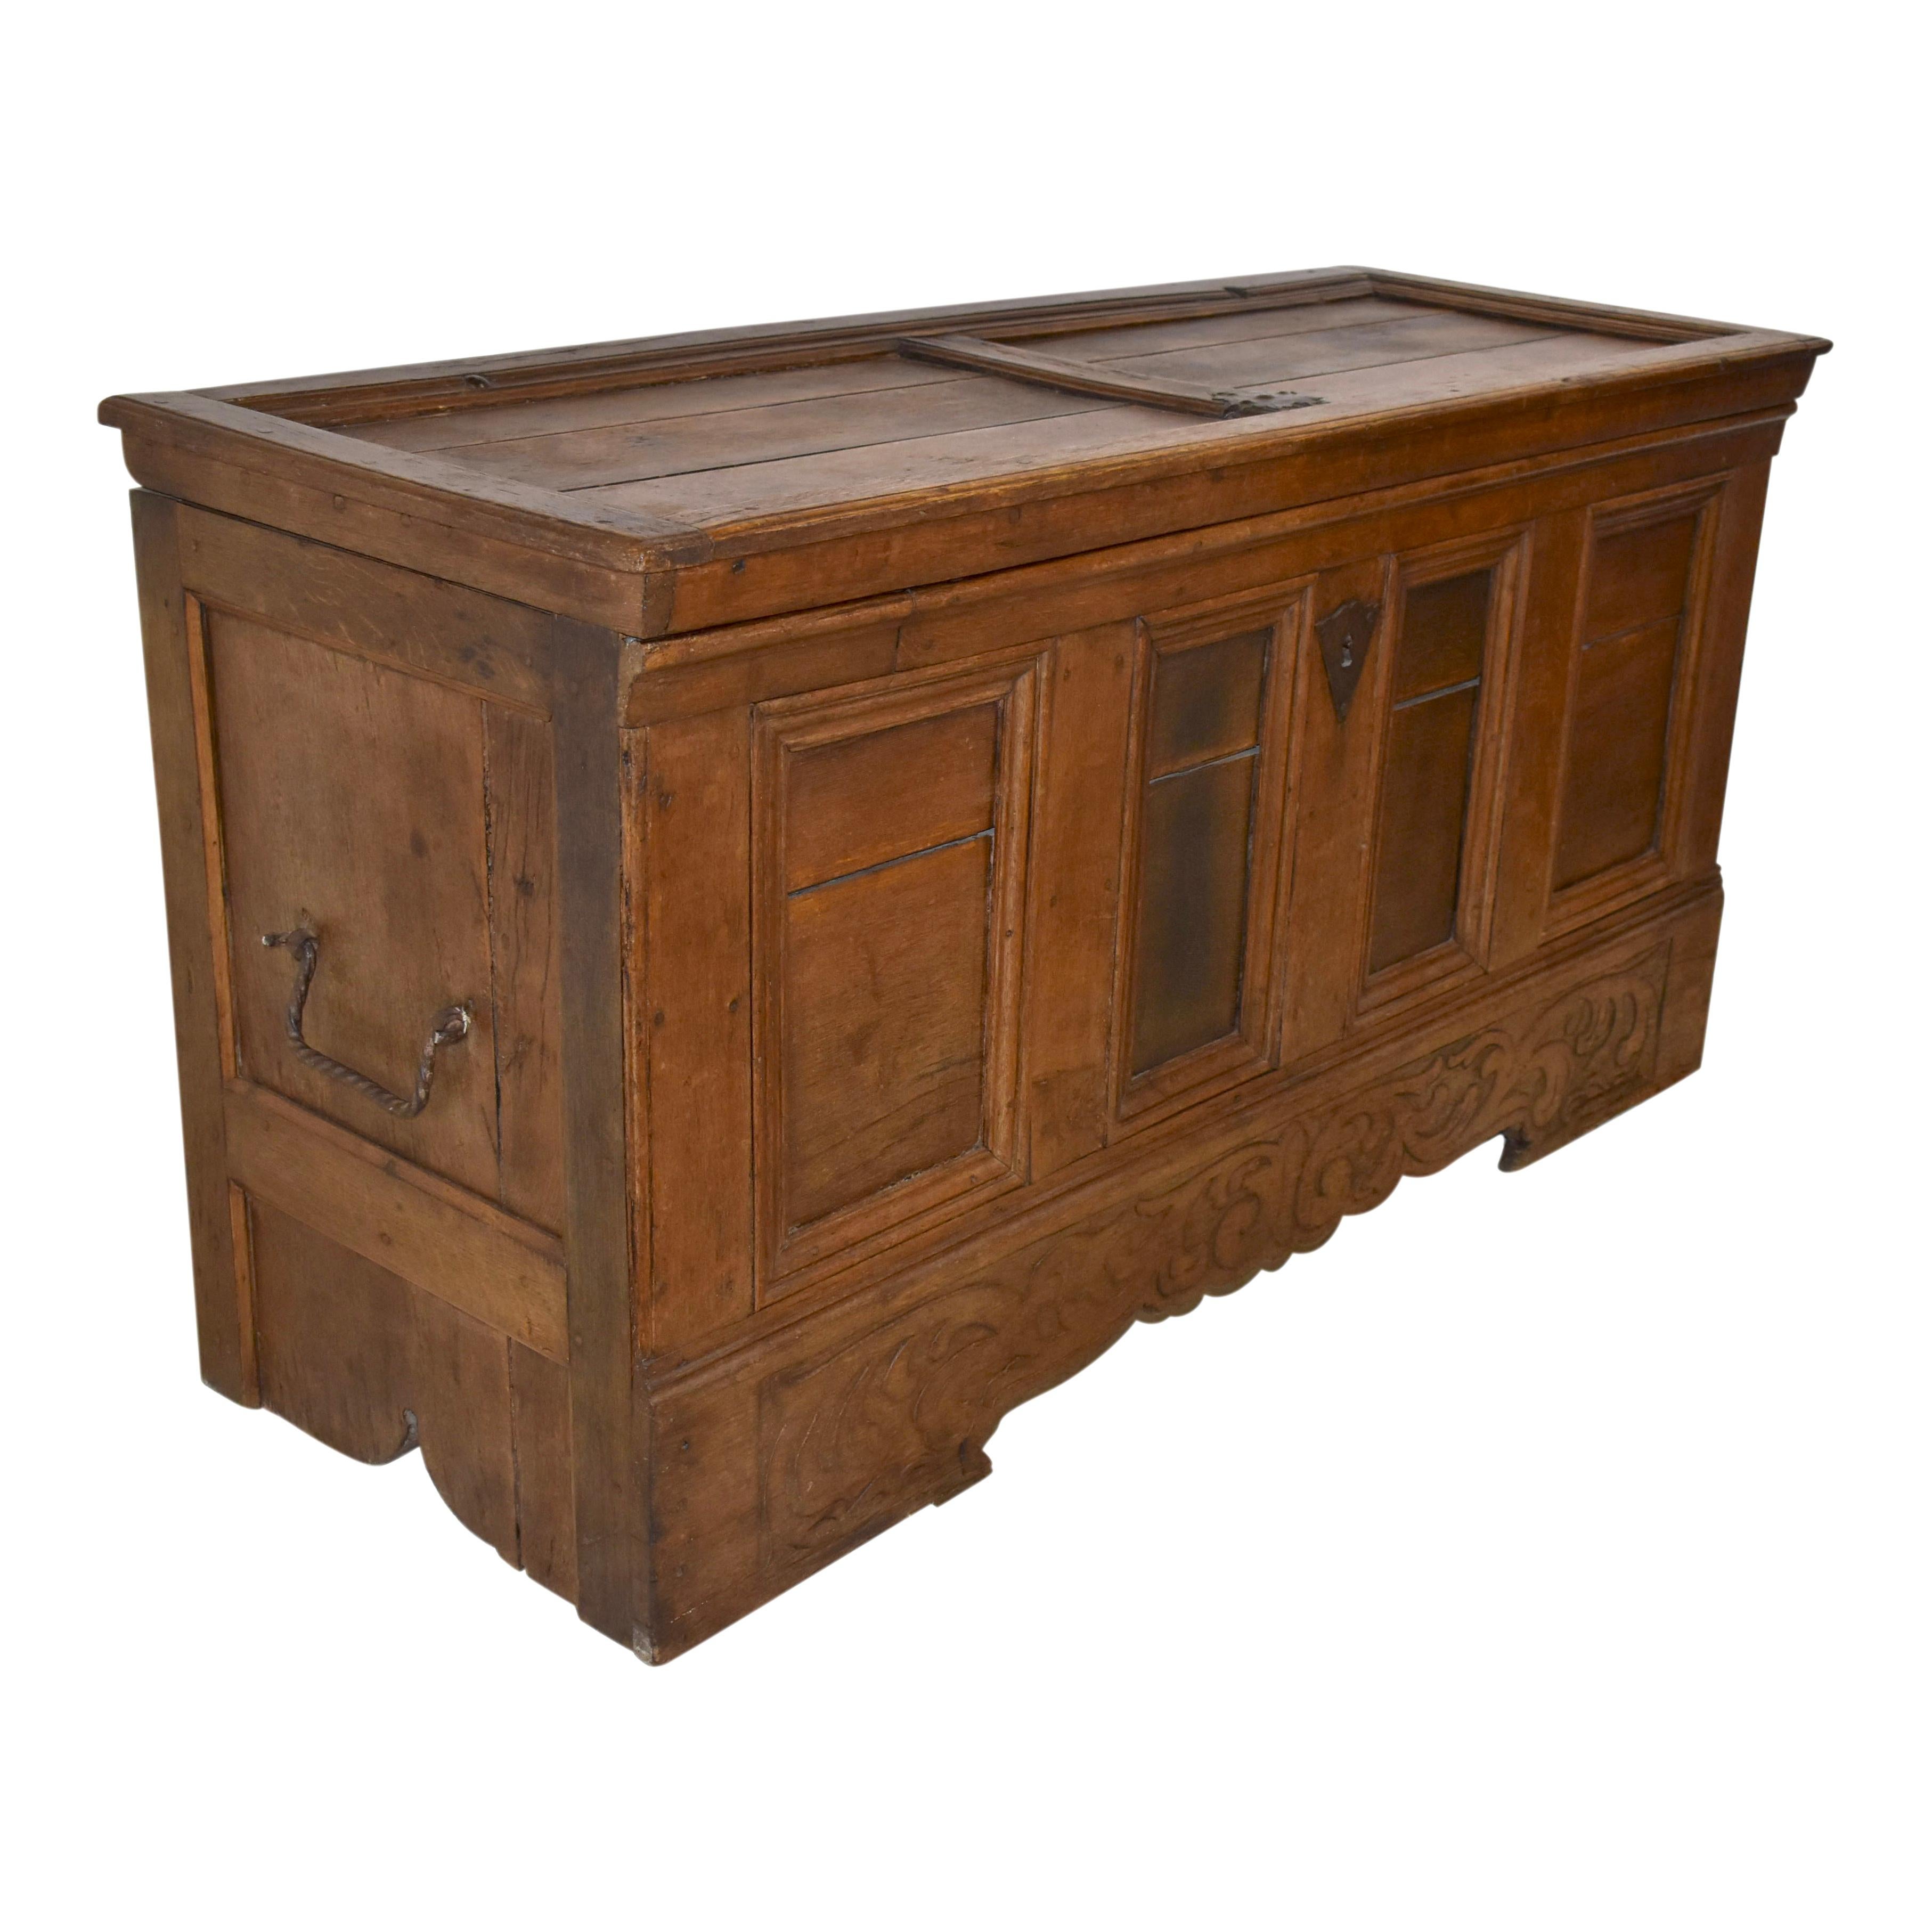 Crafted from European Oak and finished with a light stain, this substantial trunk boasts generous storage and solid construction. The trunk features a recessed plank top and recessed panels on the sides and front. A carved apron below the four front